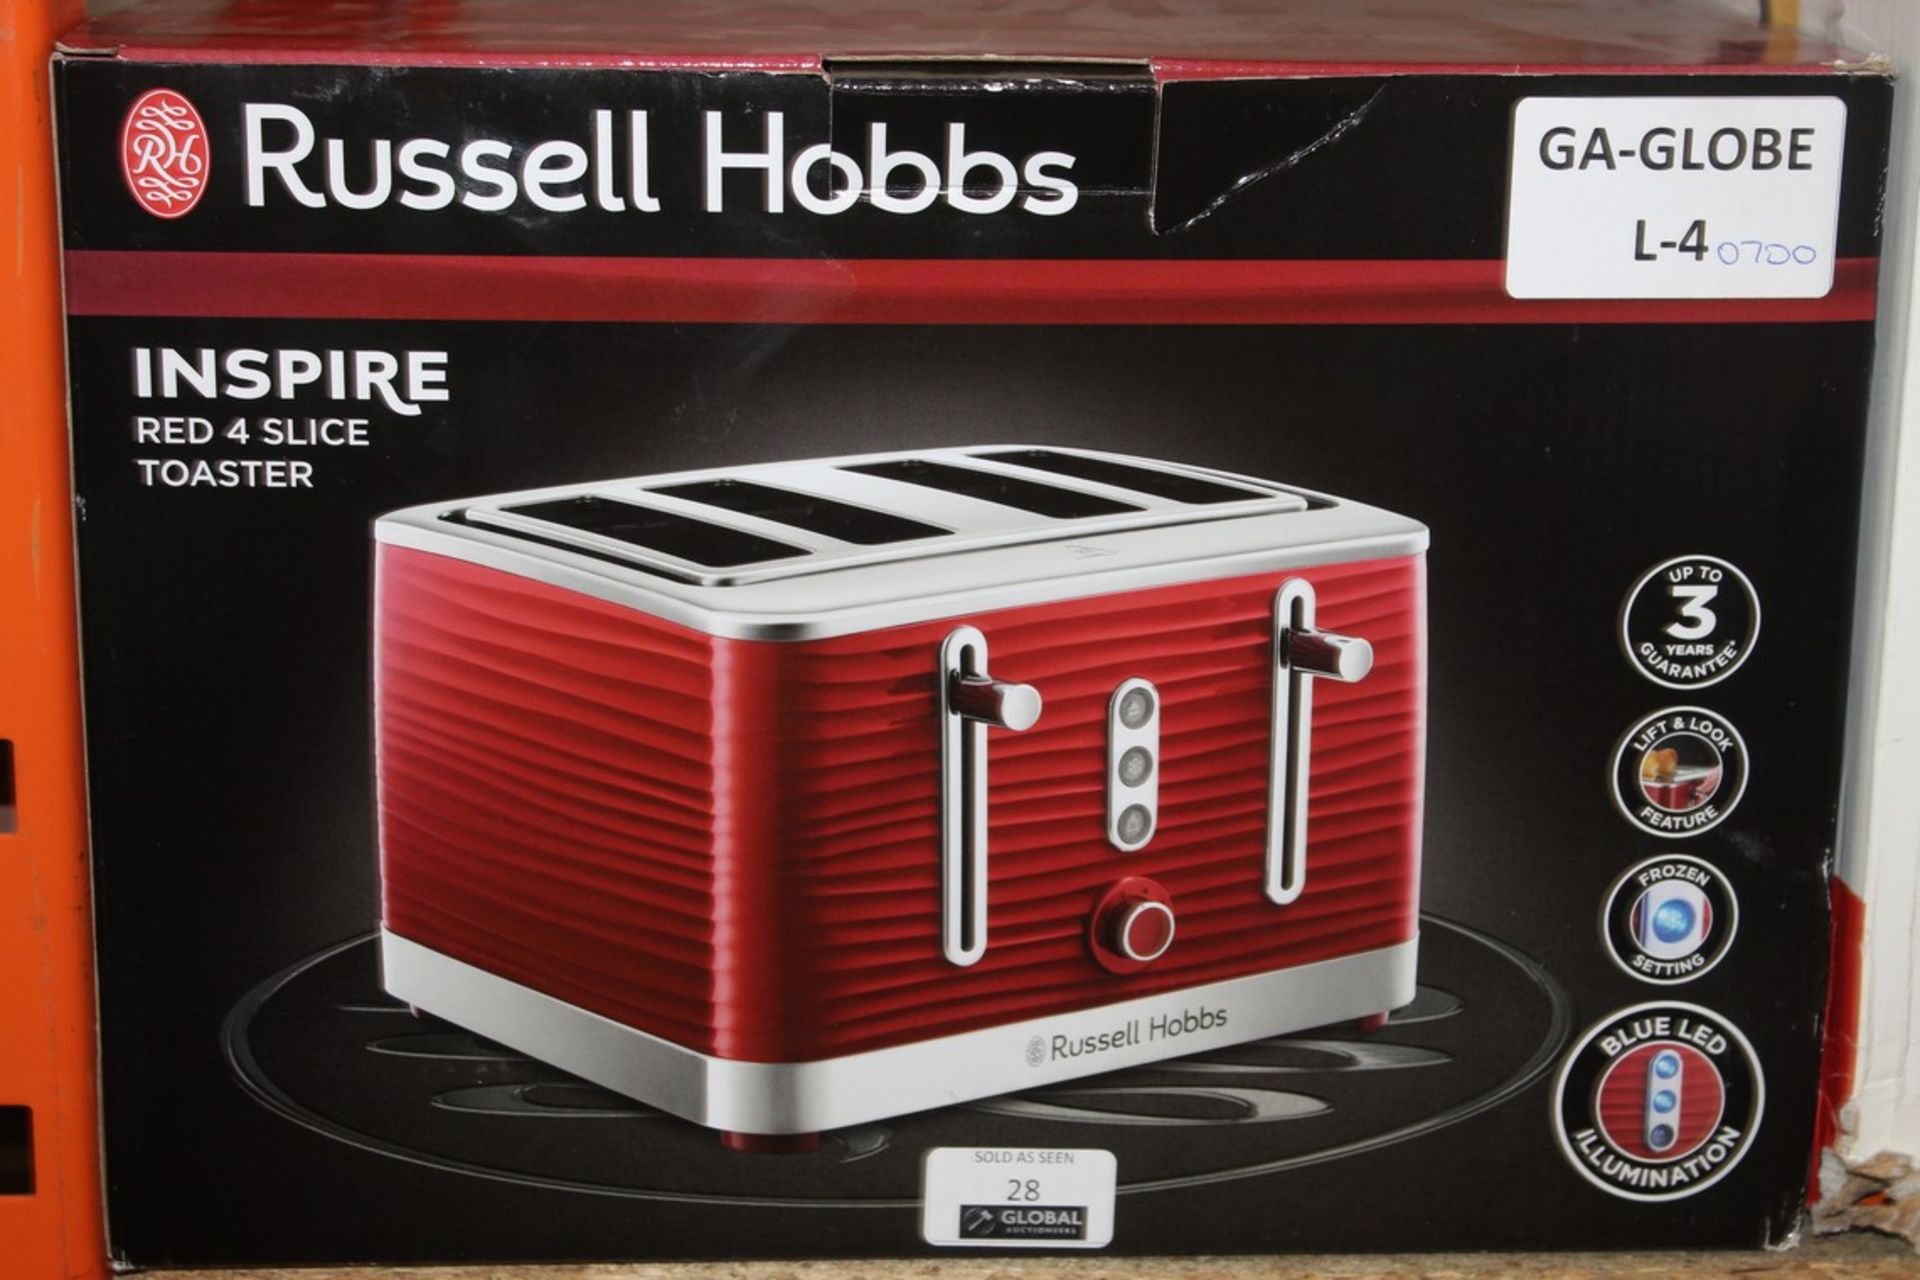 Boxed Russell Hobbs Inspire Red 4 Slice Toaster RR